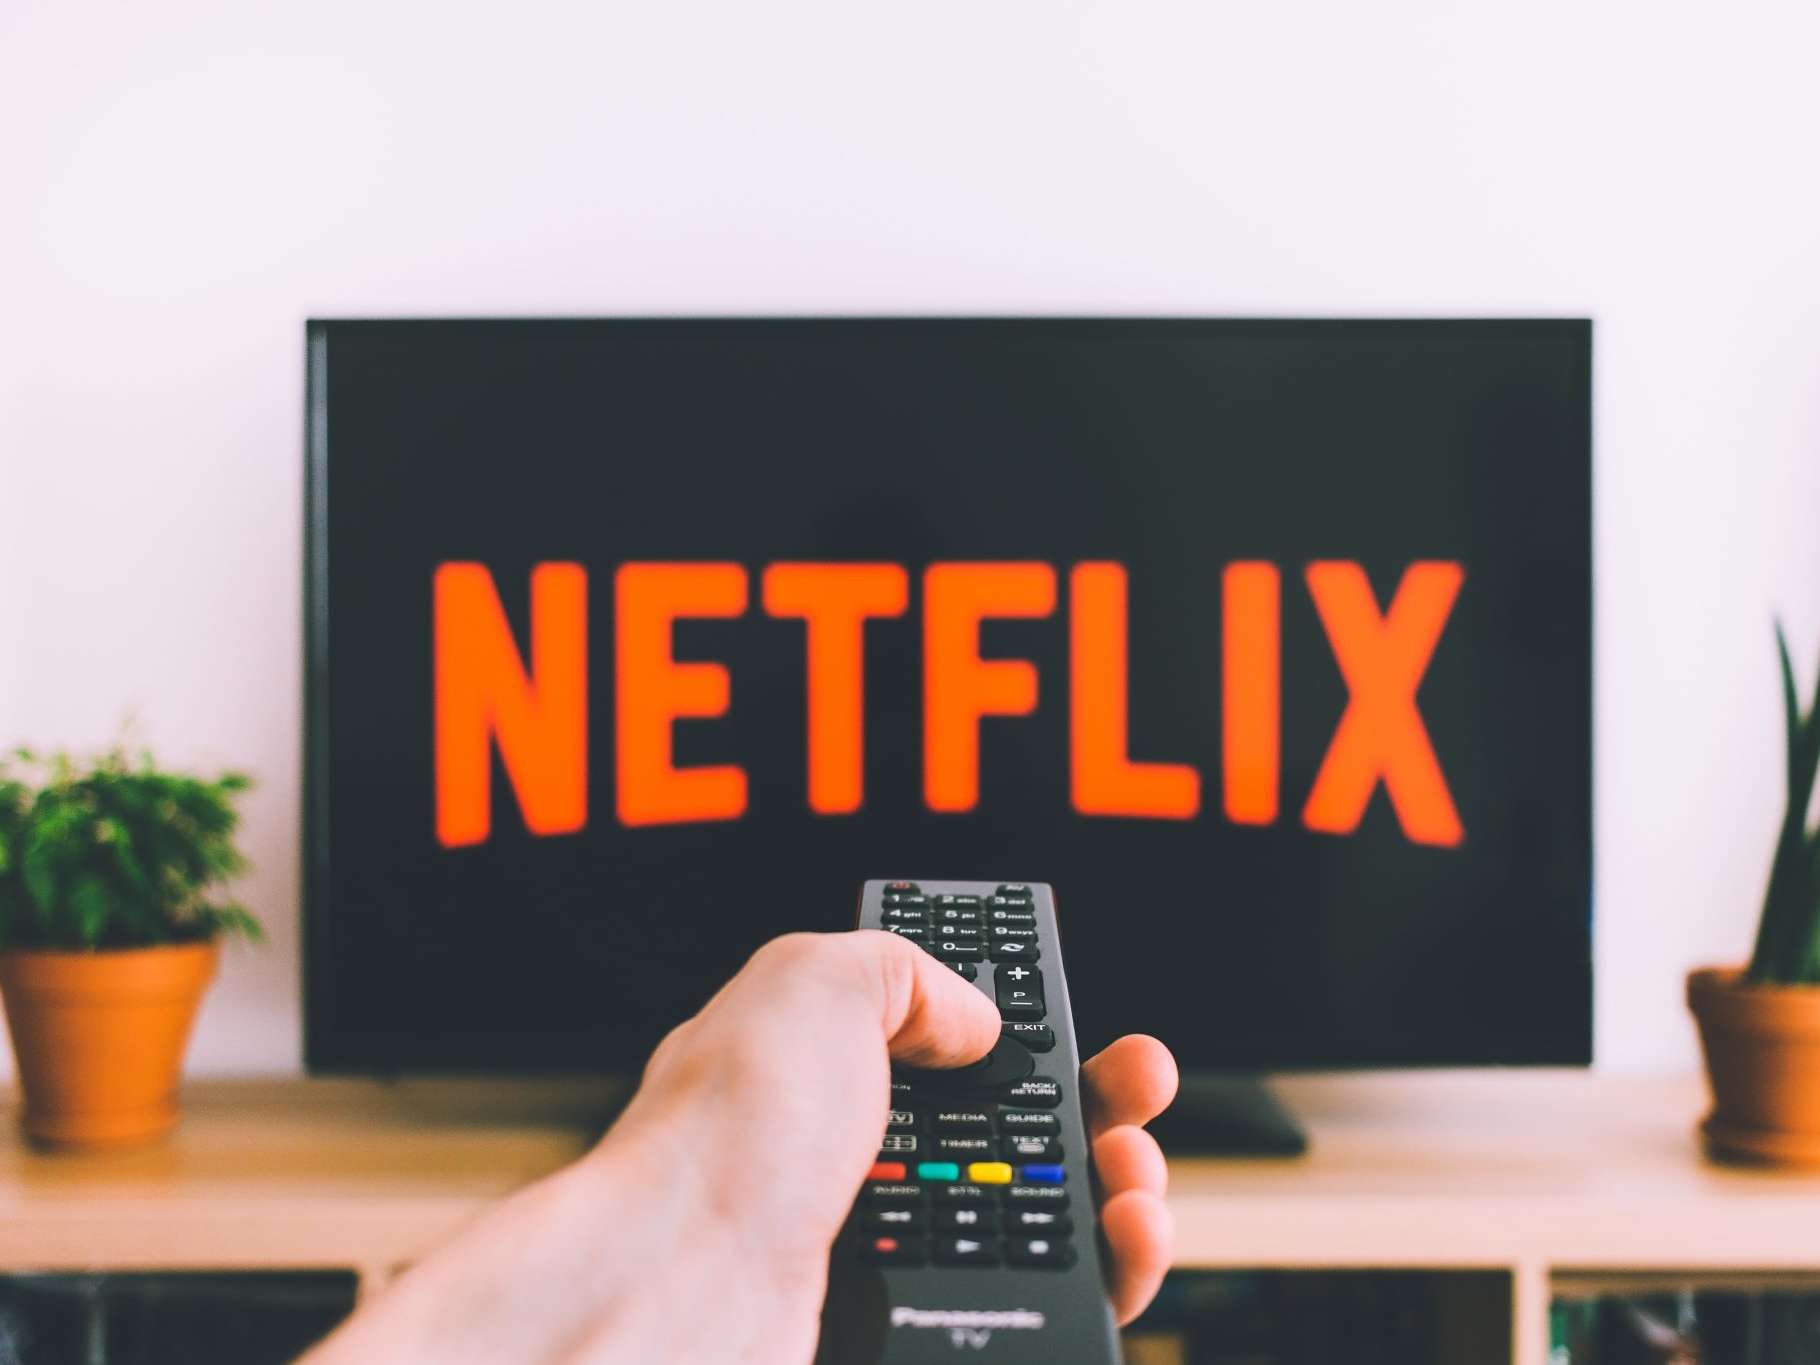 Hand pointing TV remote control at a screen showing Netflix on it